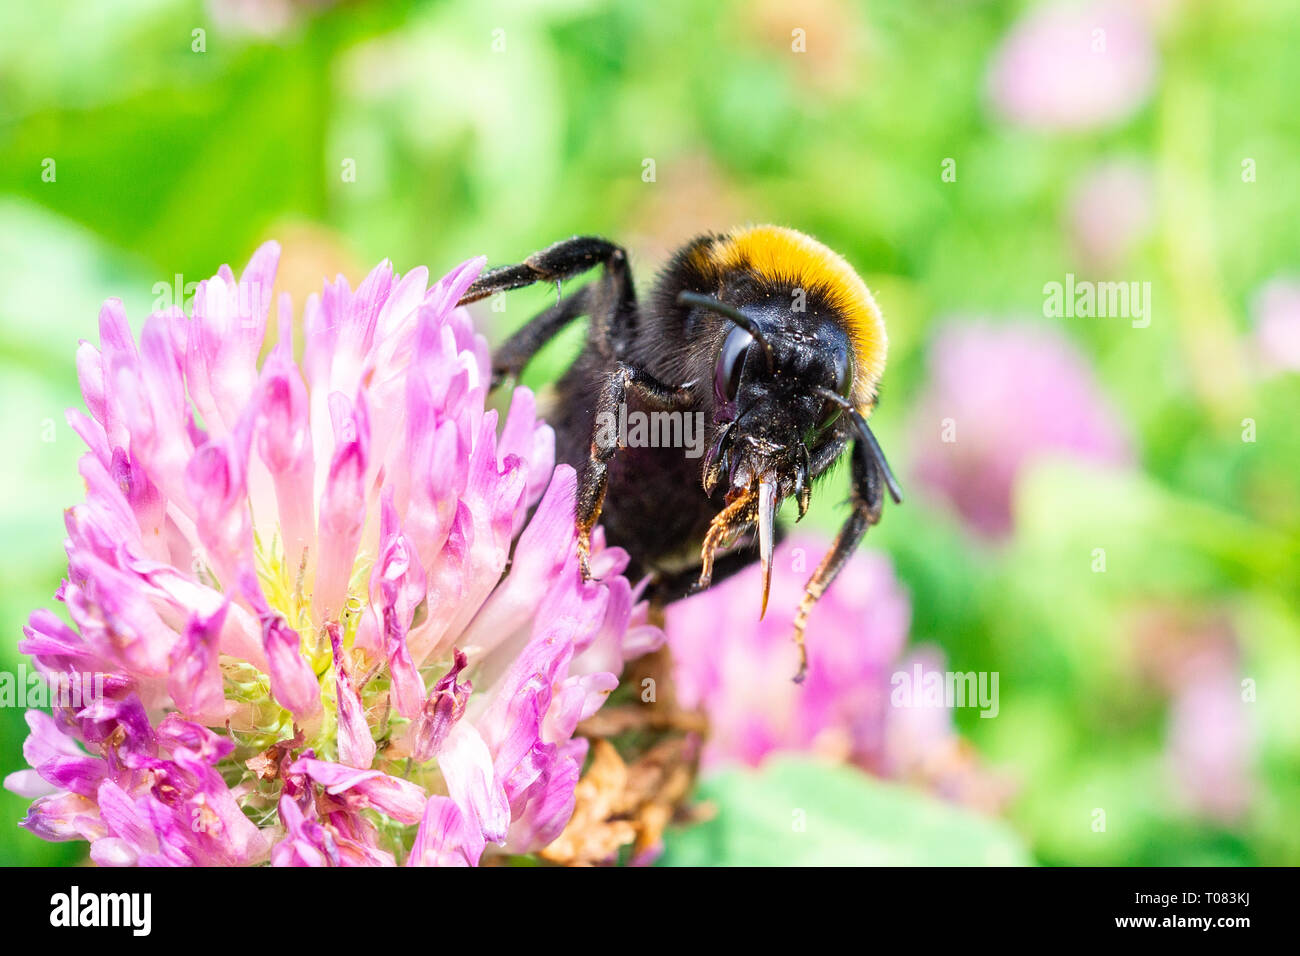 A bumblebee gathers pollen on a red flower, a bumblebee on a clover Stock Photo